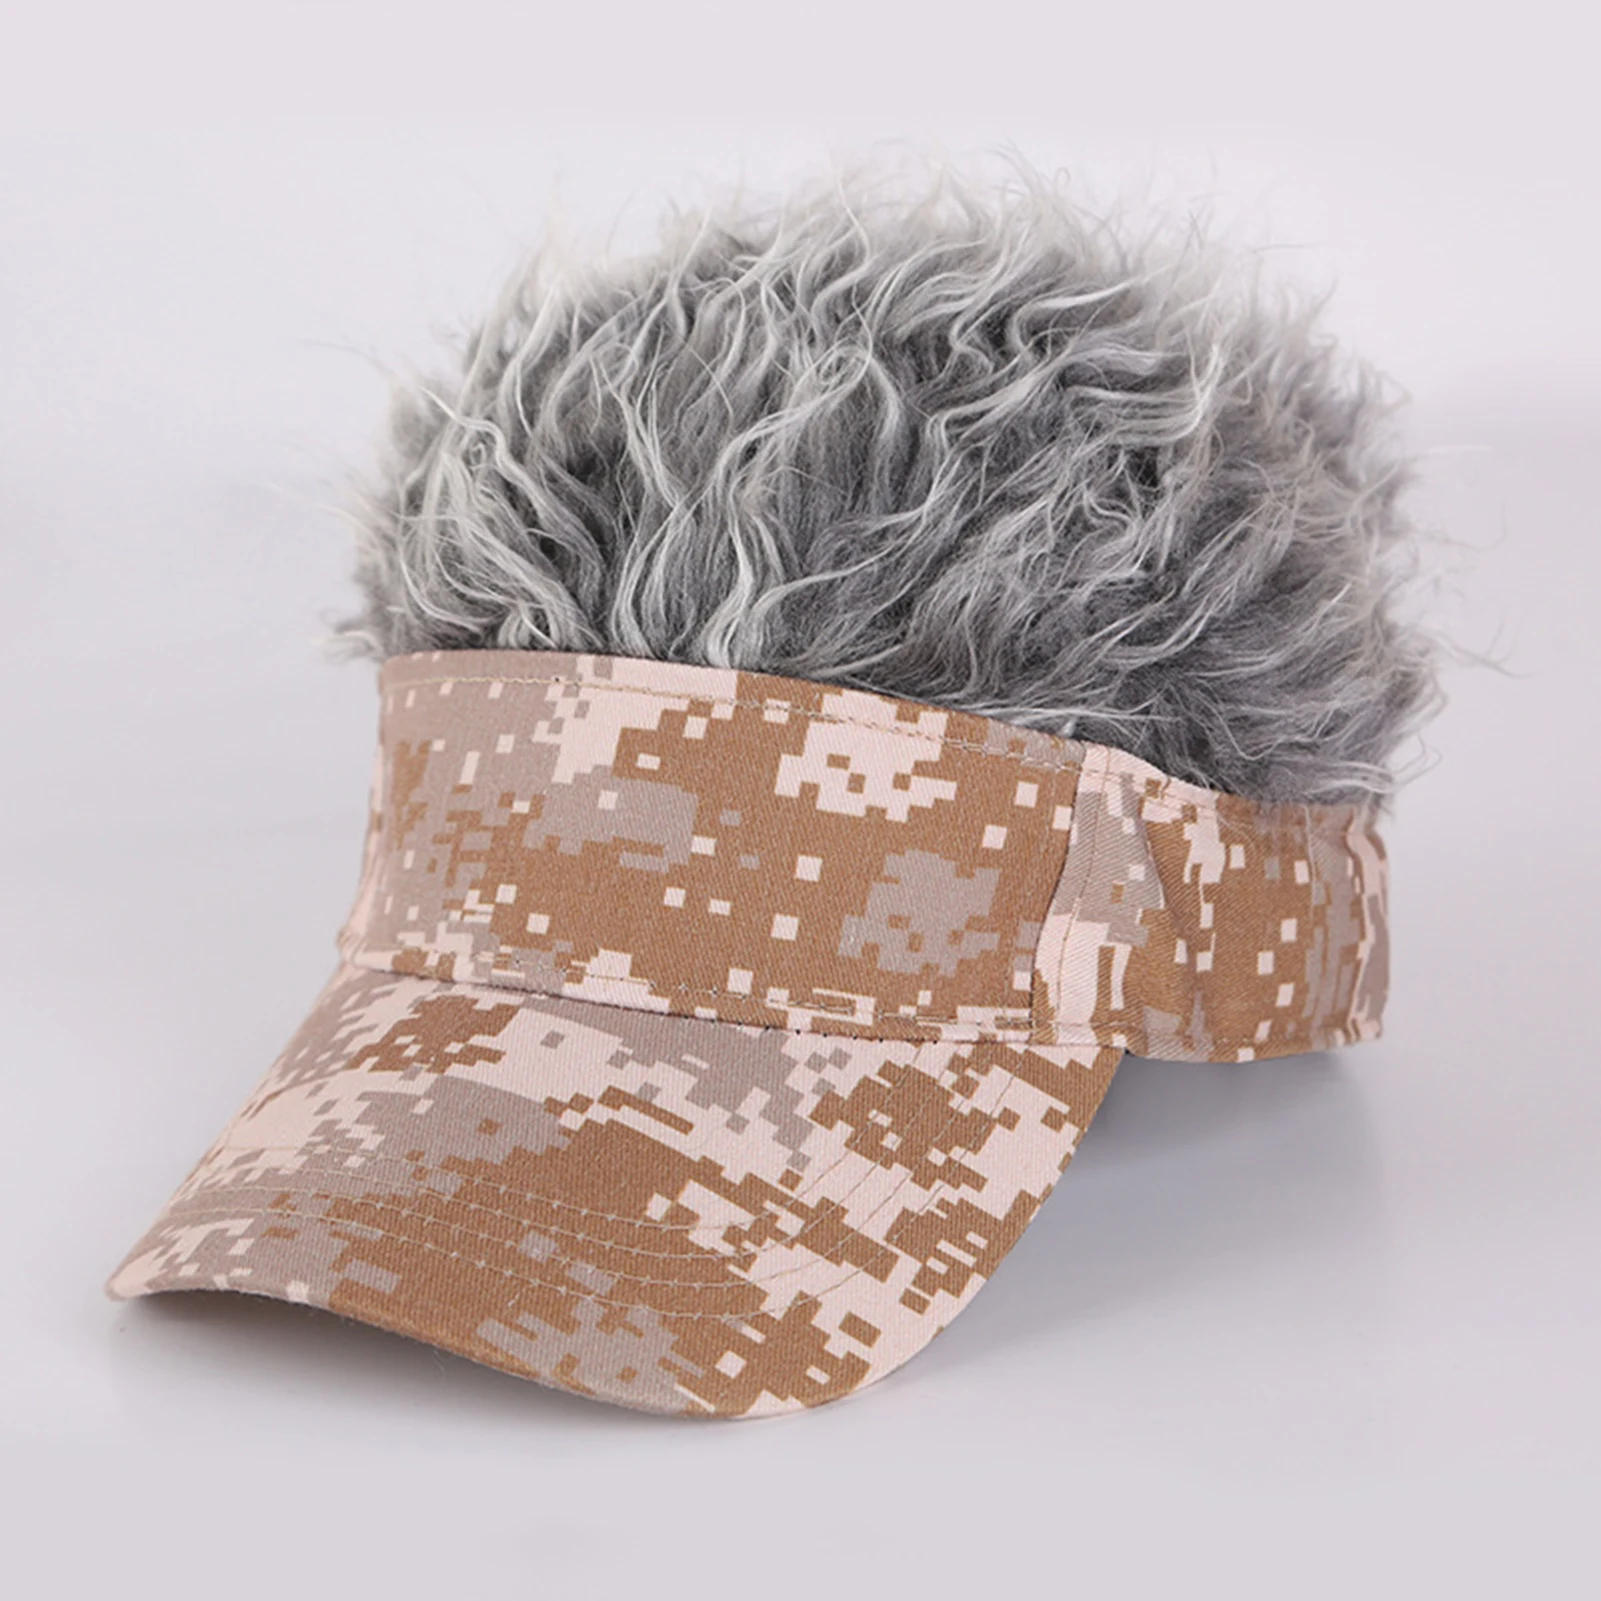 

Camouflage Visor Baseball Cap with Spiked Hairs Wig Baseball Hat with Spiked Wigs Men Women Casual Concise Sunshade Sun Visor